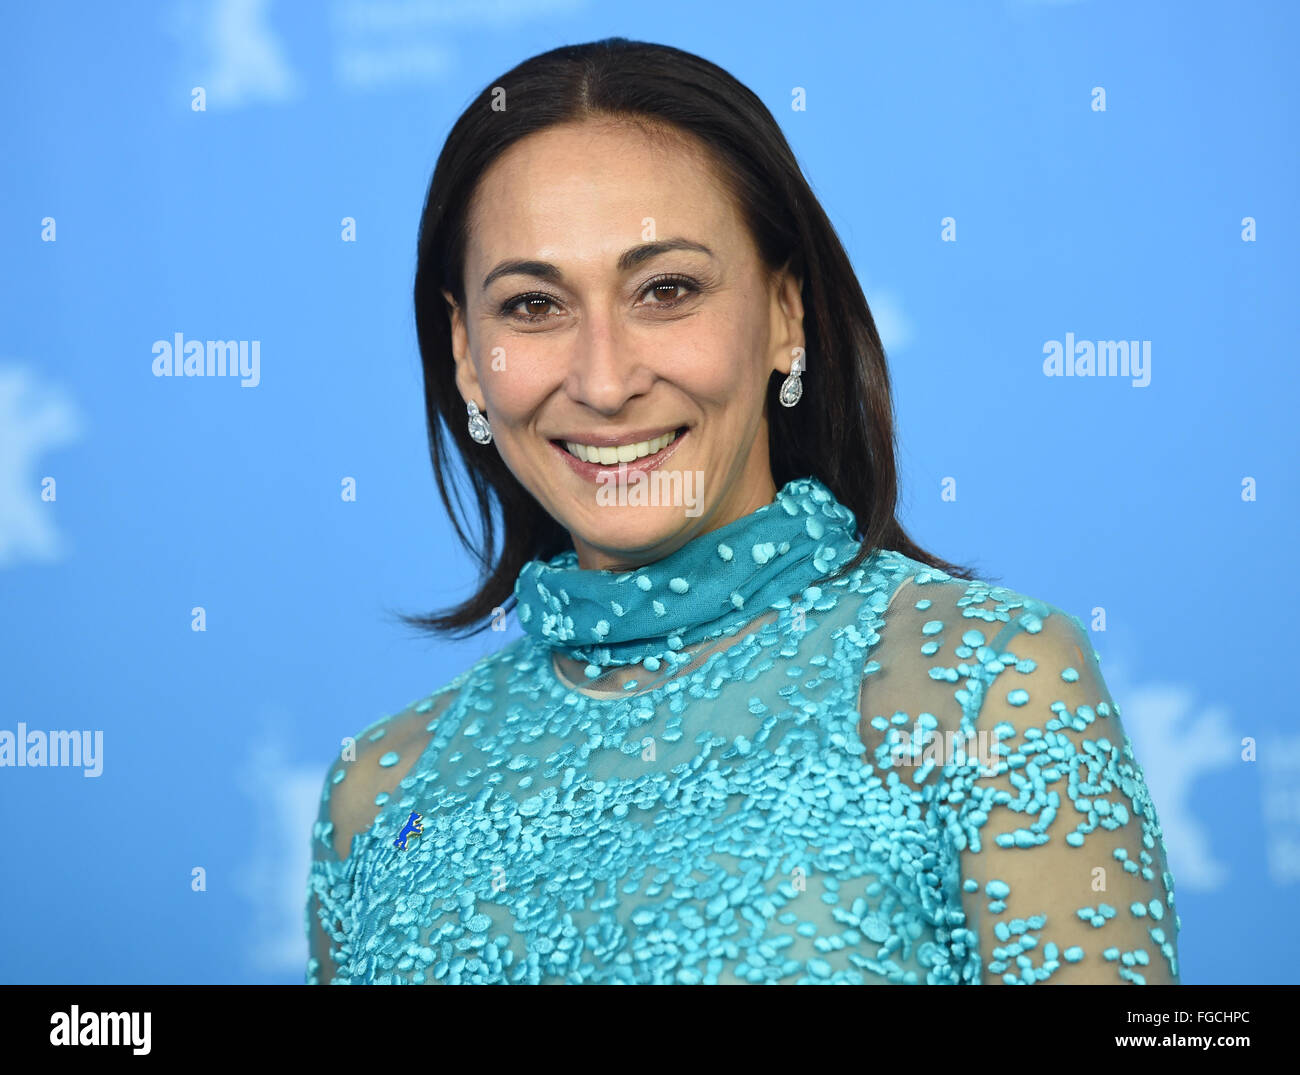 Berlin, Germany. 18th Feb, 2016. 66th International Film Festival in Berlin, Germany, 18 February 2016. Photo Call 'Hele Sa Hiwagang Hapis' ('A Lullaby To The Sorrowful Mystery'). Cherie Gil. The film is shown in the section Competition of the Berlinale. The Berlinale runs from 11 February to 21 February 2016. PHOTO: BRITTA PEDERSEN/dpa/Alamy Live News Stock Photo